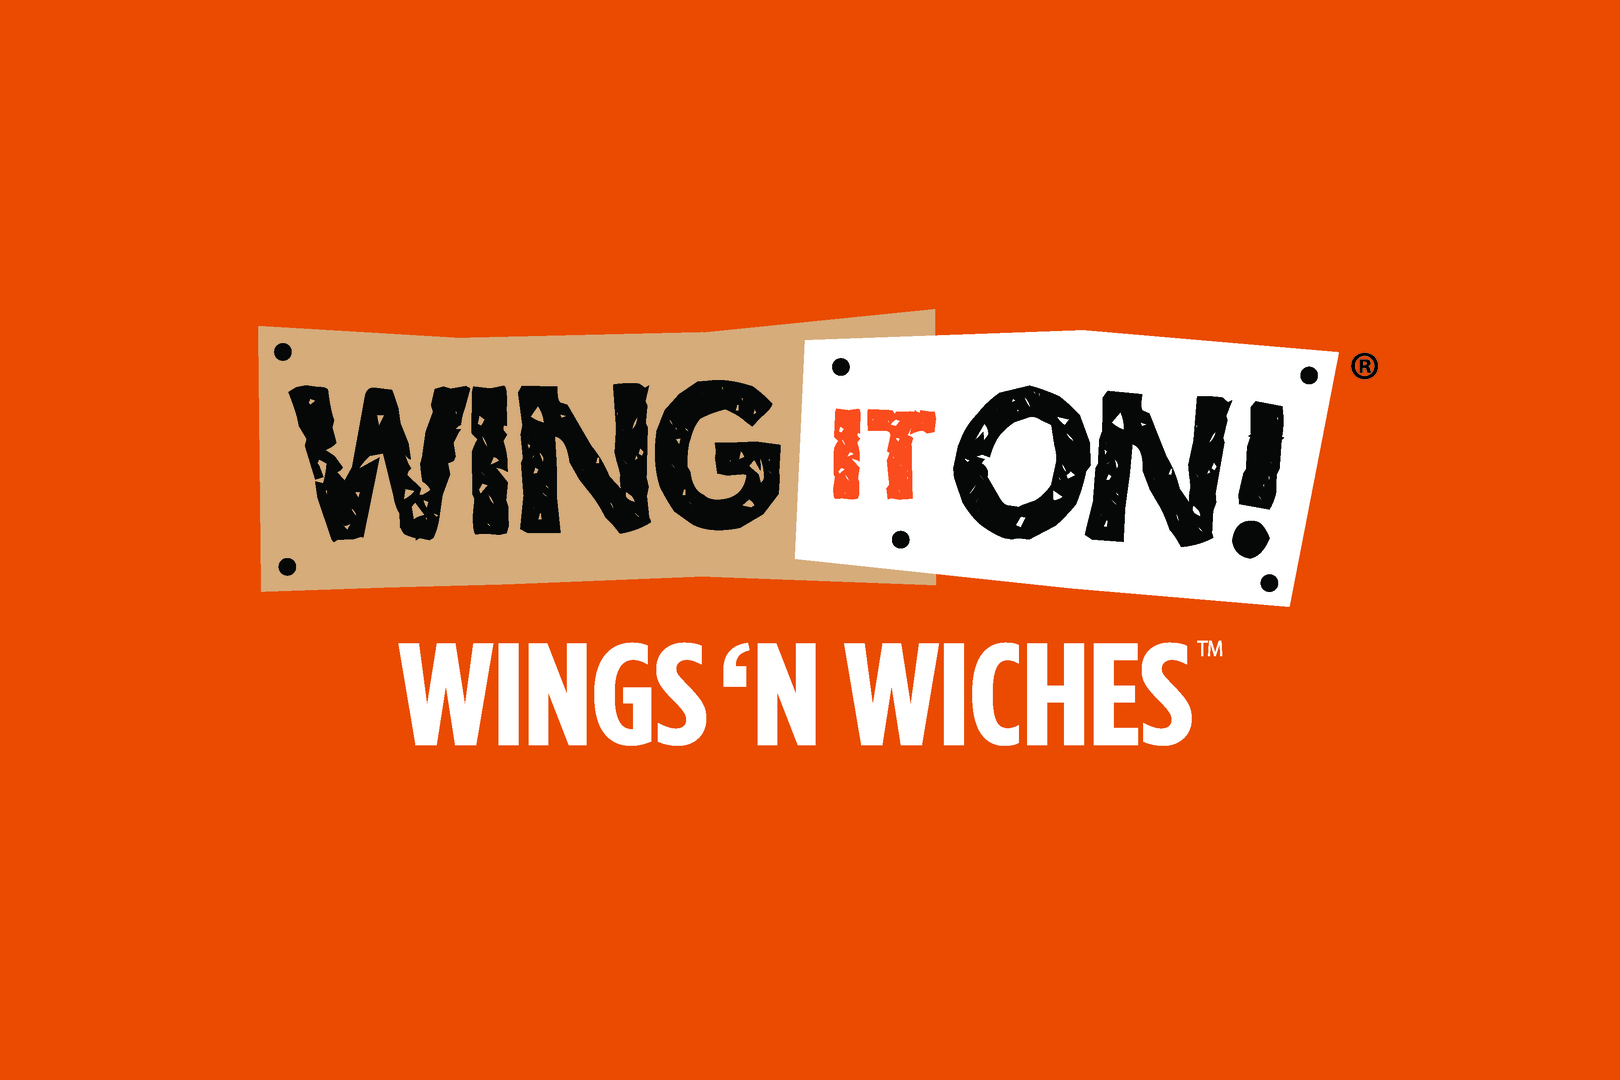 Wing It On! Franchise Now Expanding In Apex, Holly Springs, Fuquay Varina, Wake Forrest, Cary, Clayton, Garner, Raleigh/Durham/Chapel Hill NC Areas.